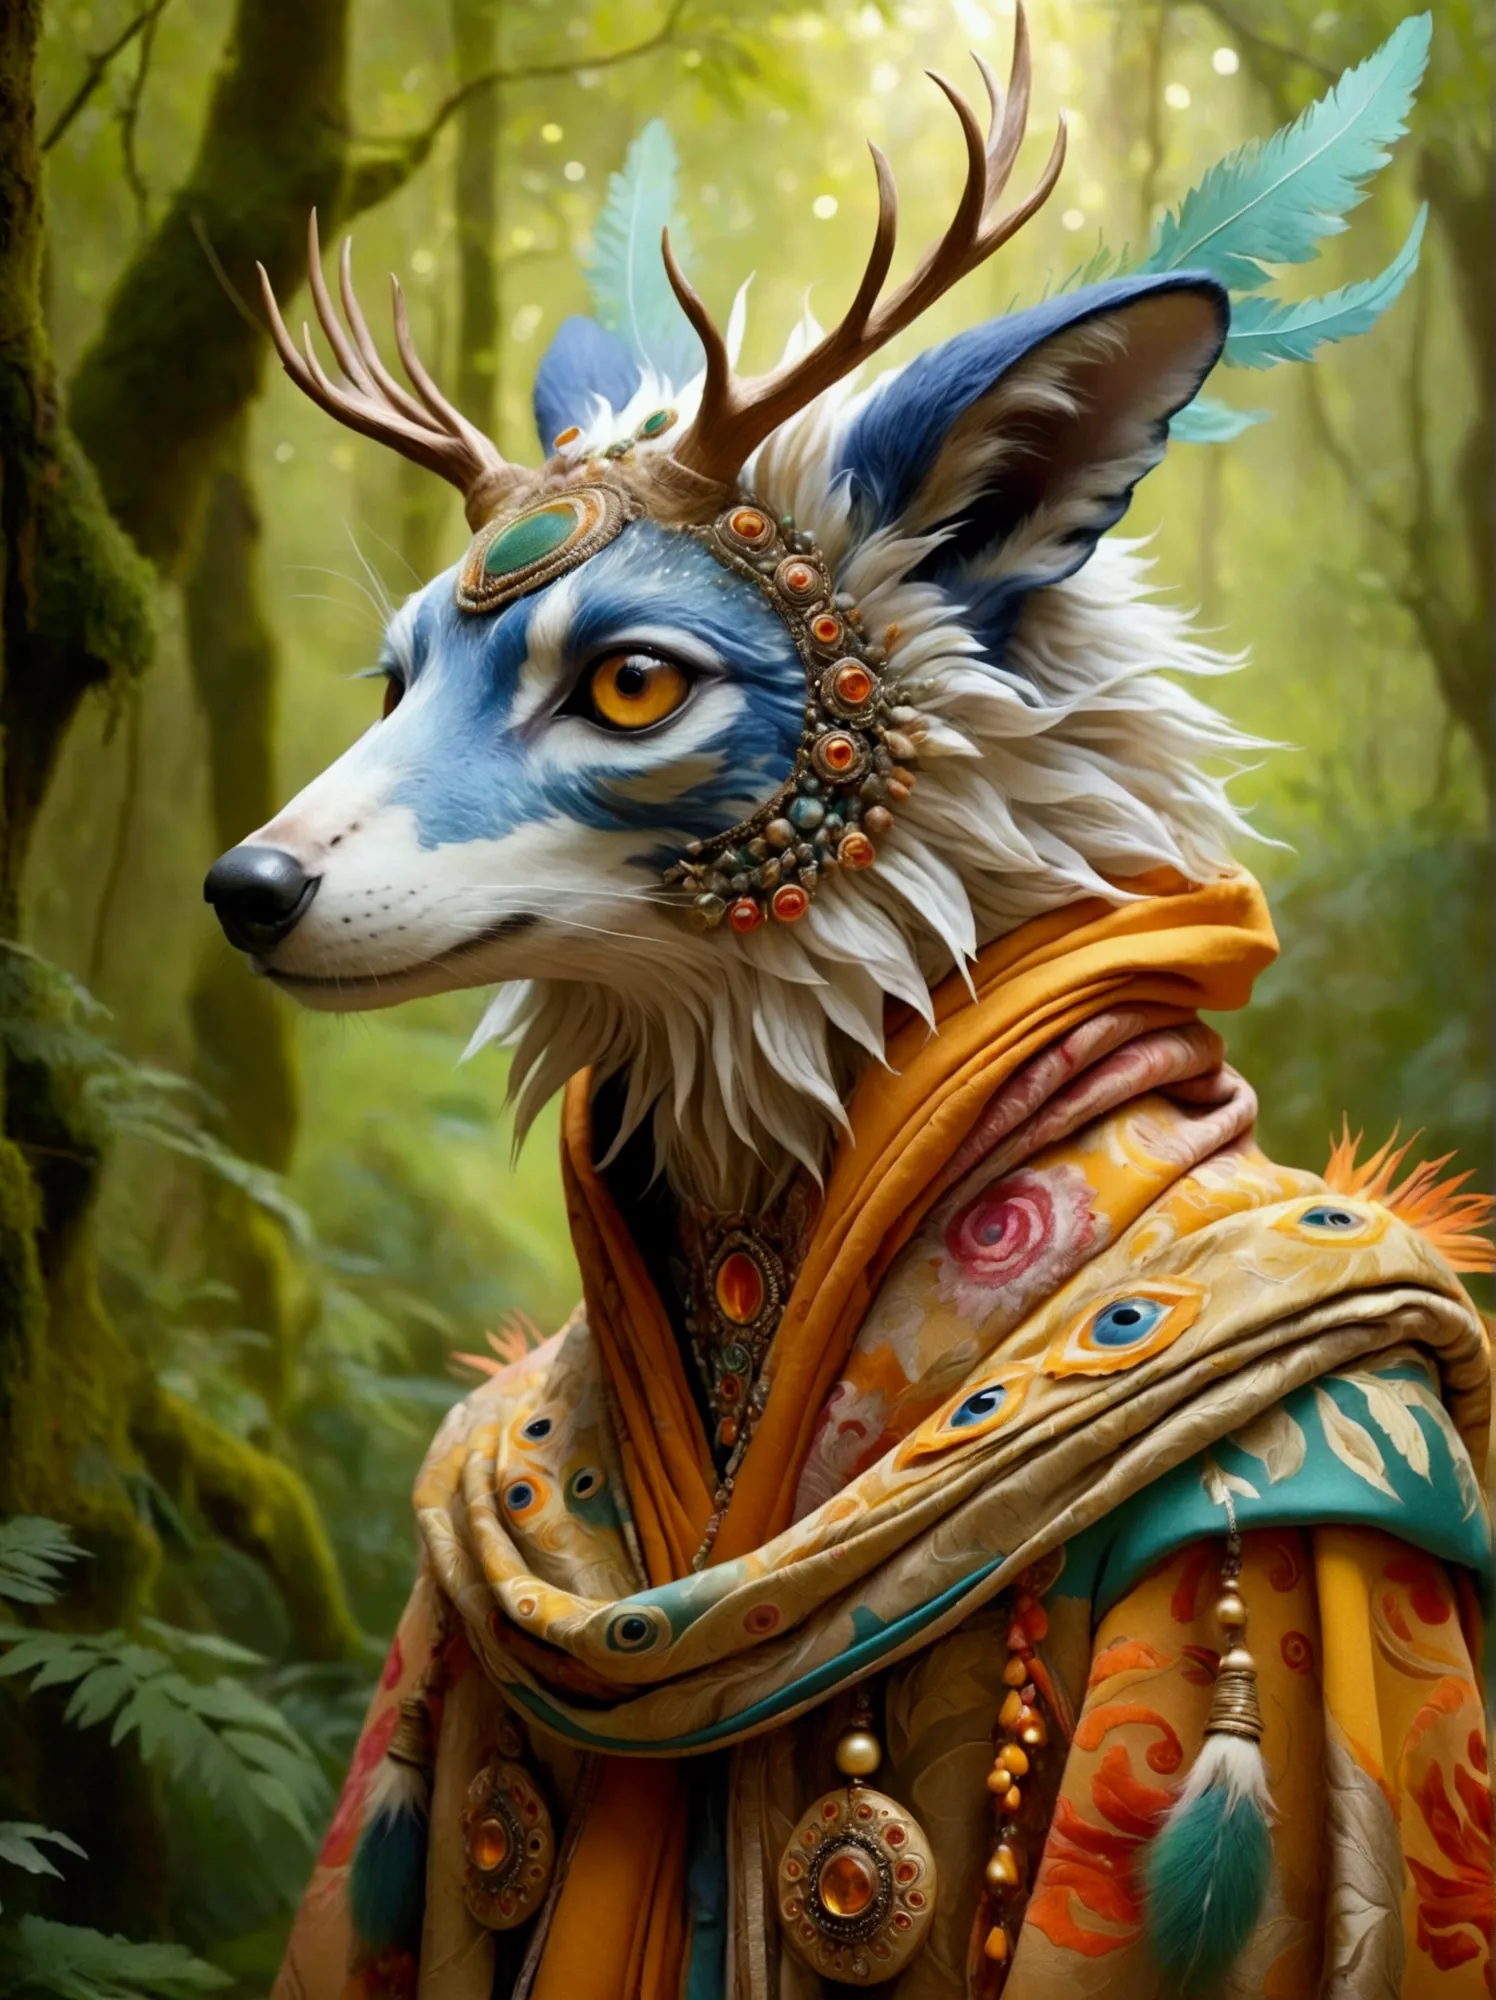 Create an image of a mystical creature that resembles a humanoid animal, draped in heavy, richly decorated garments. Its head sh...